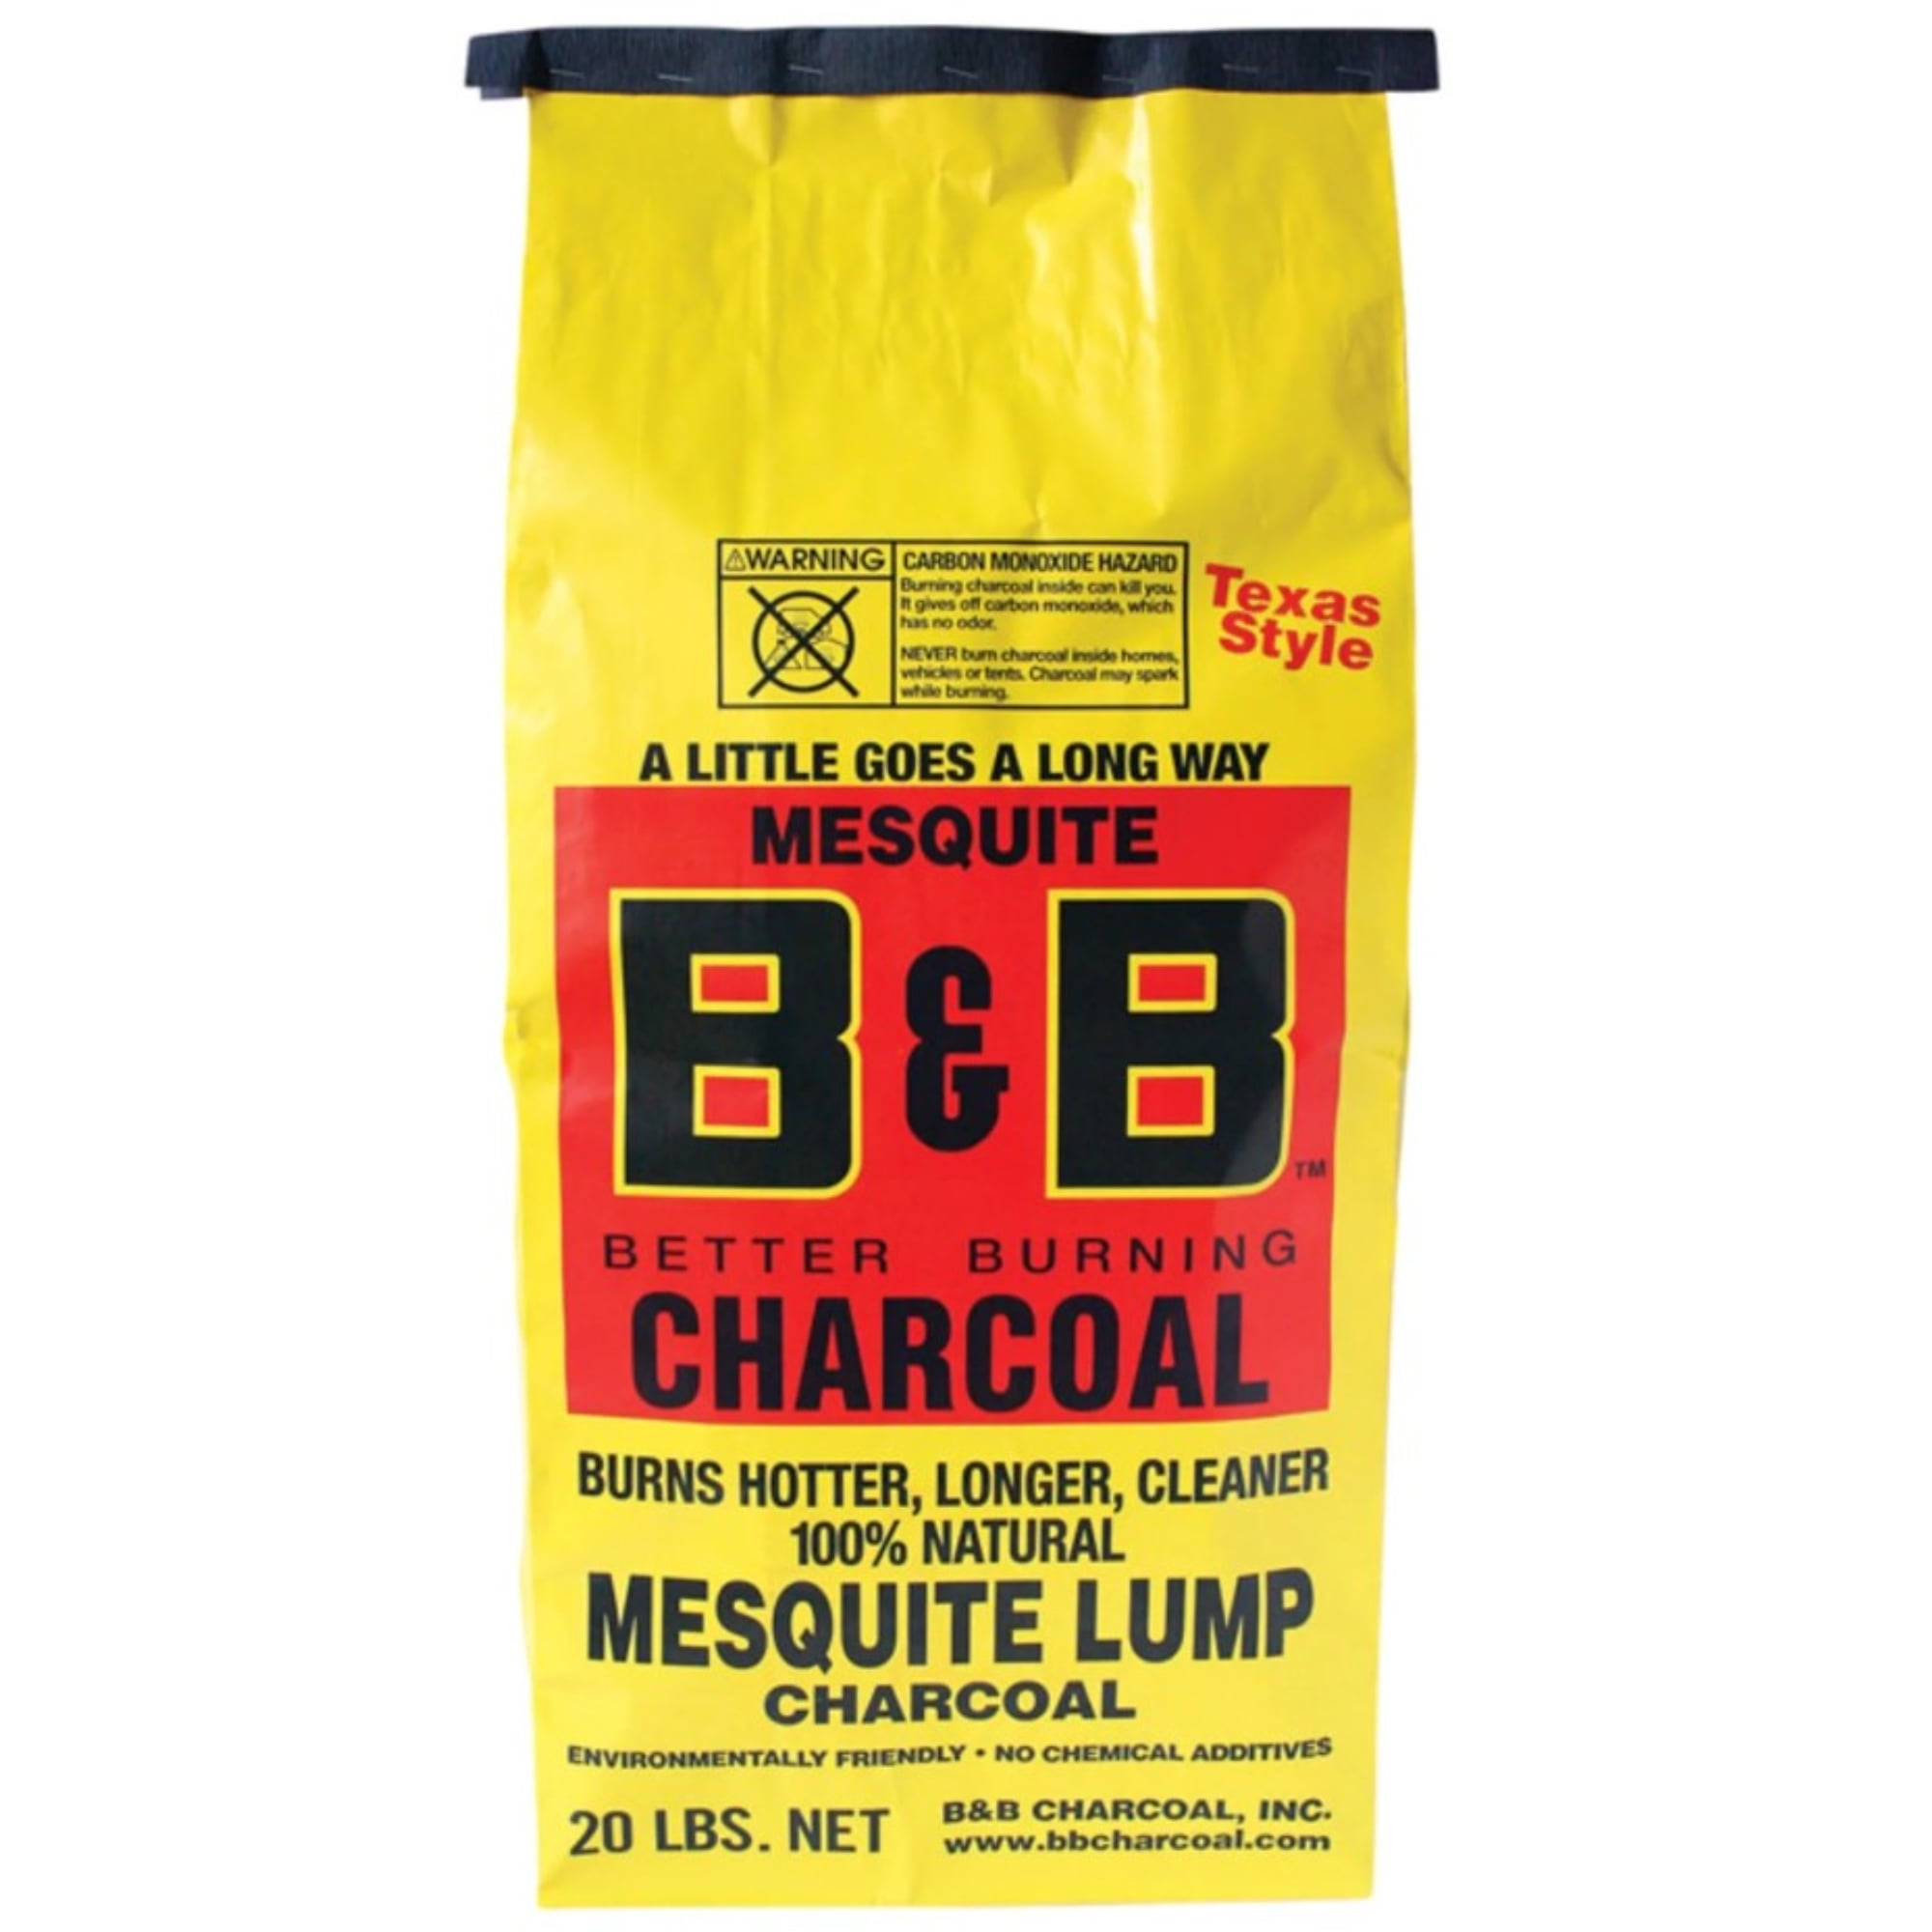 8023445 20 Lbs All Natural Mesquite Lump, Charcoal